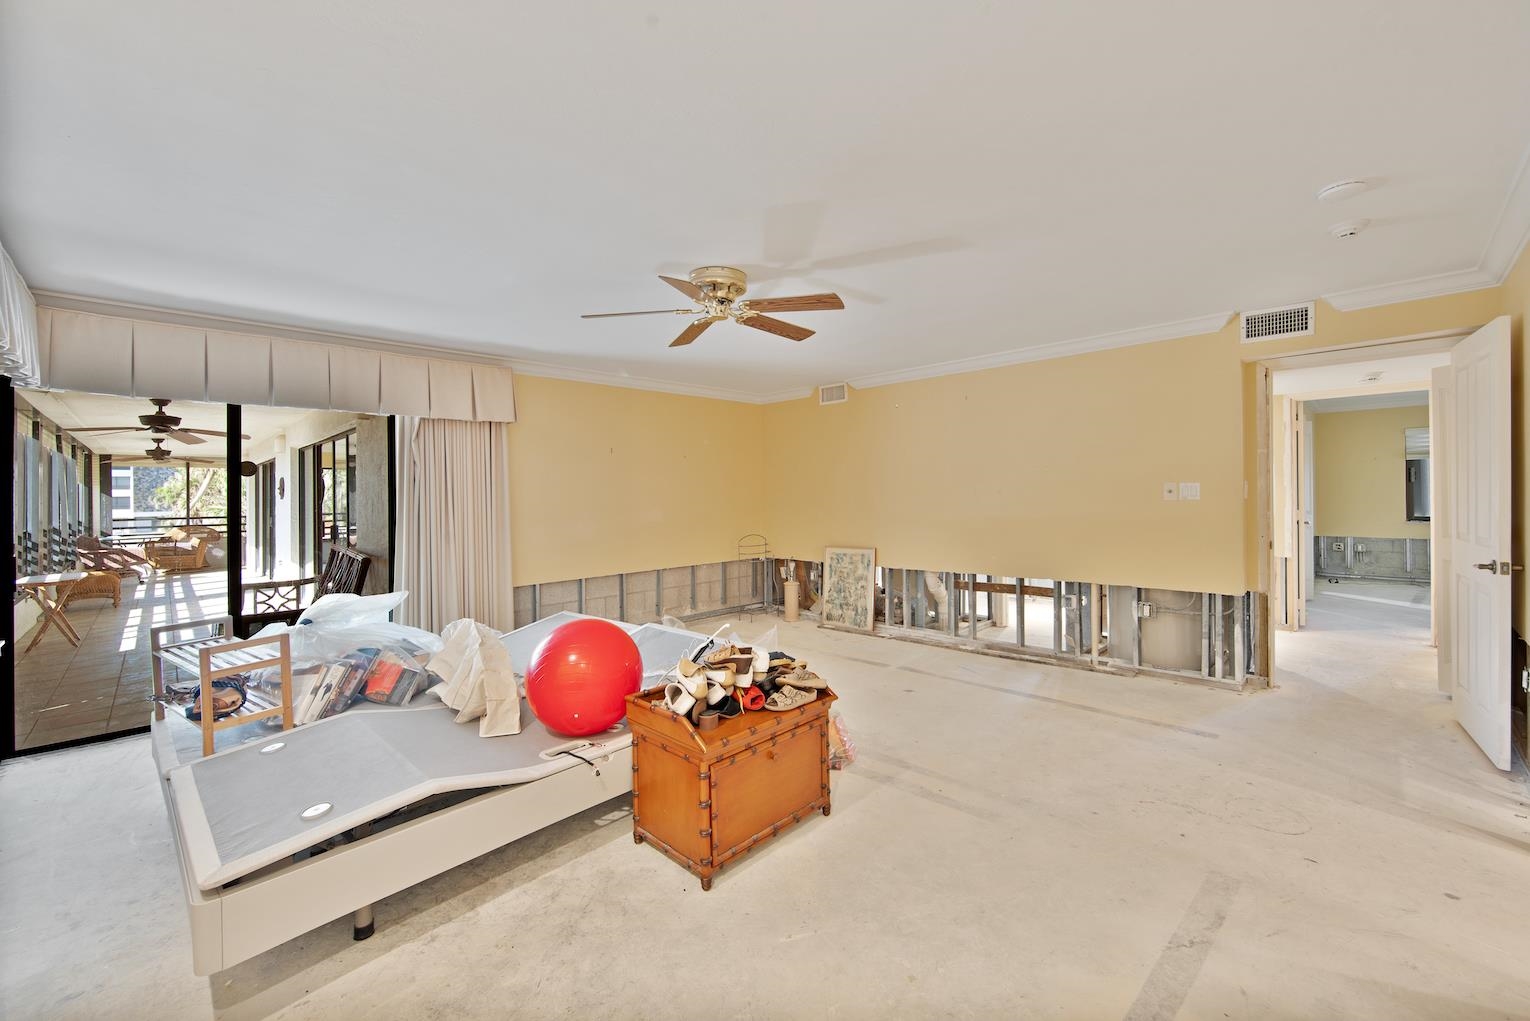 1605 Middle Gulf Drive, Sanibel, Florida 33957, 3 Bedrooms Bedrooms, ,3 BathroomsBathrooms,Condo,For Sale,Middle Gulf Drive,2230112